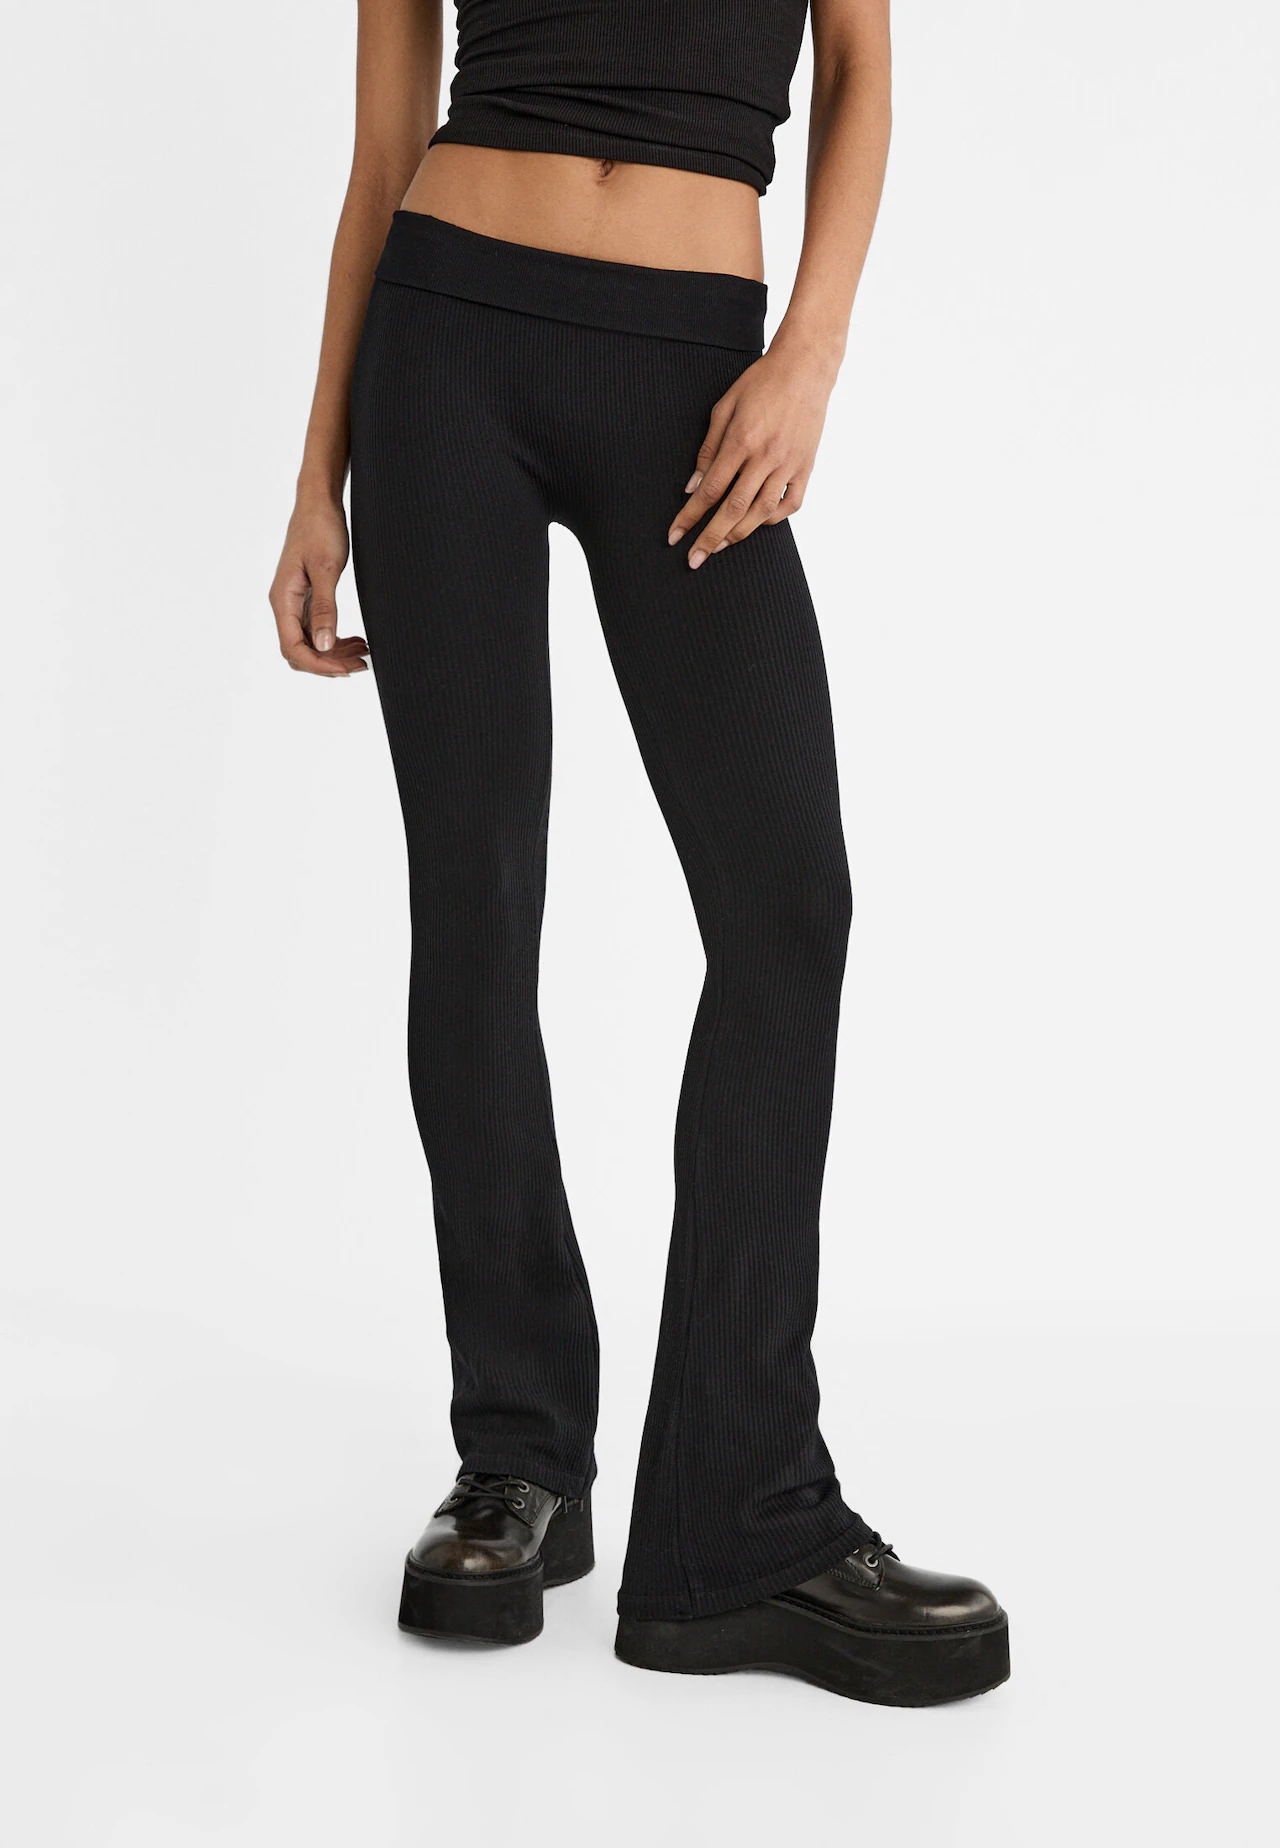 Stradivarius seamless ribbed leggings in chocolate brown Size XS - $13 (48%  Off Retail) - From Mary